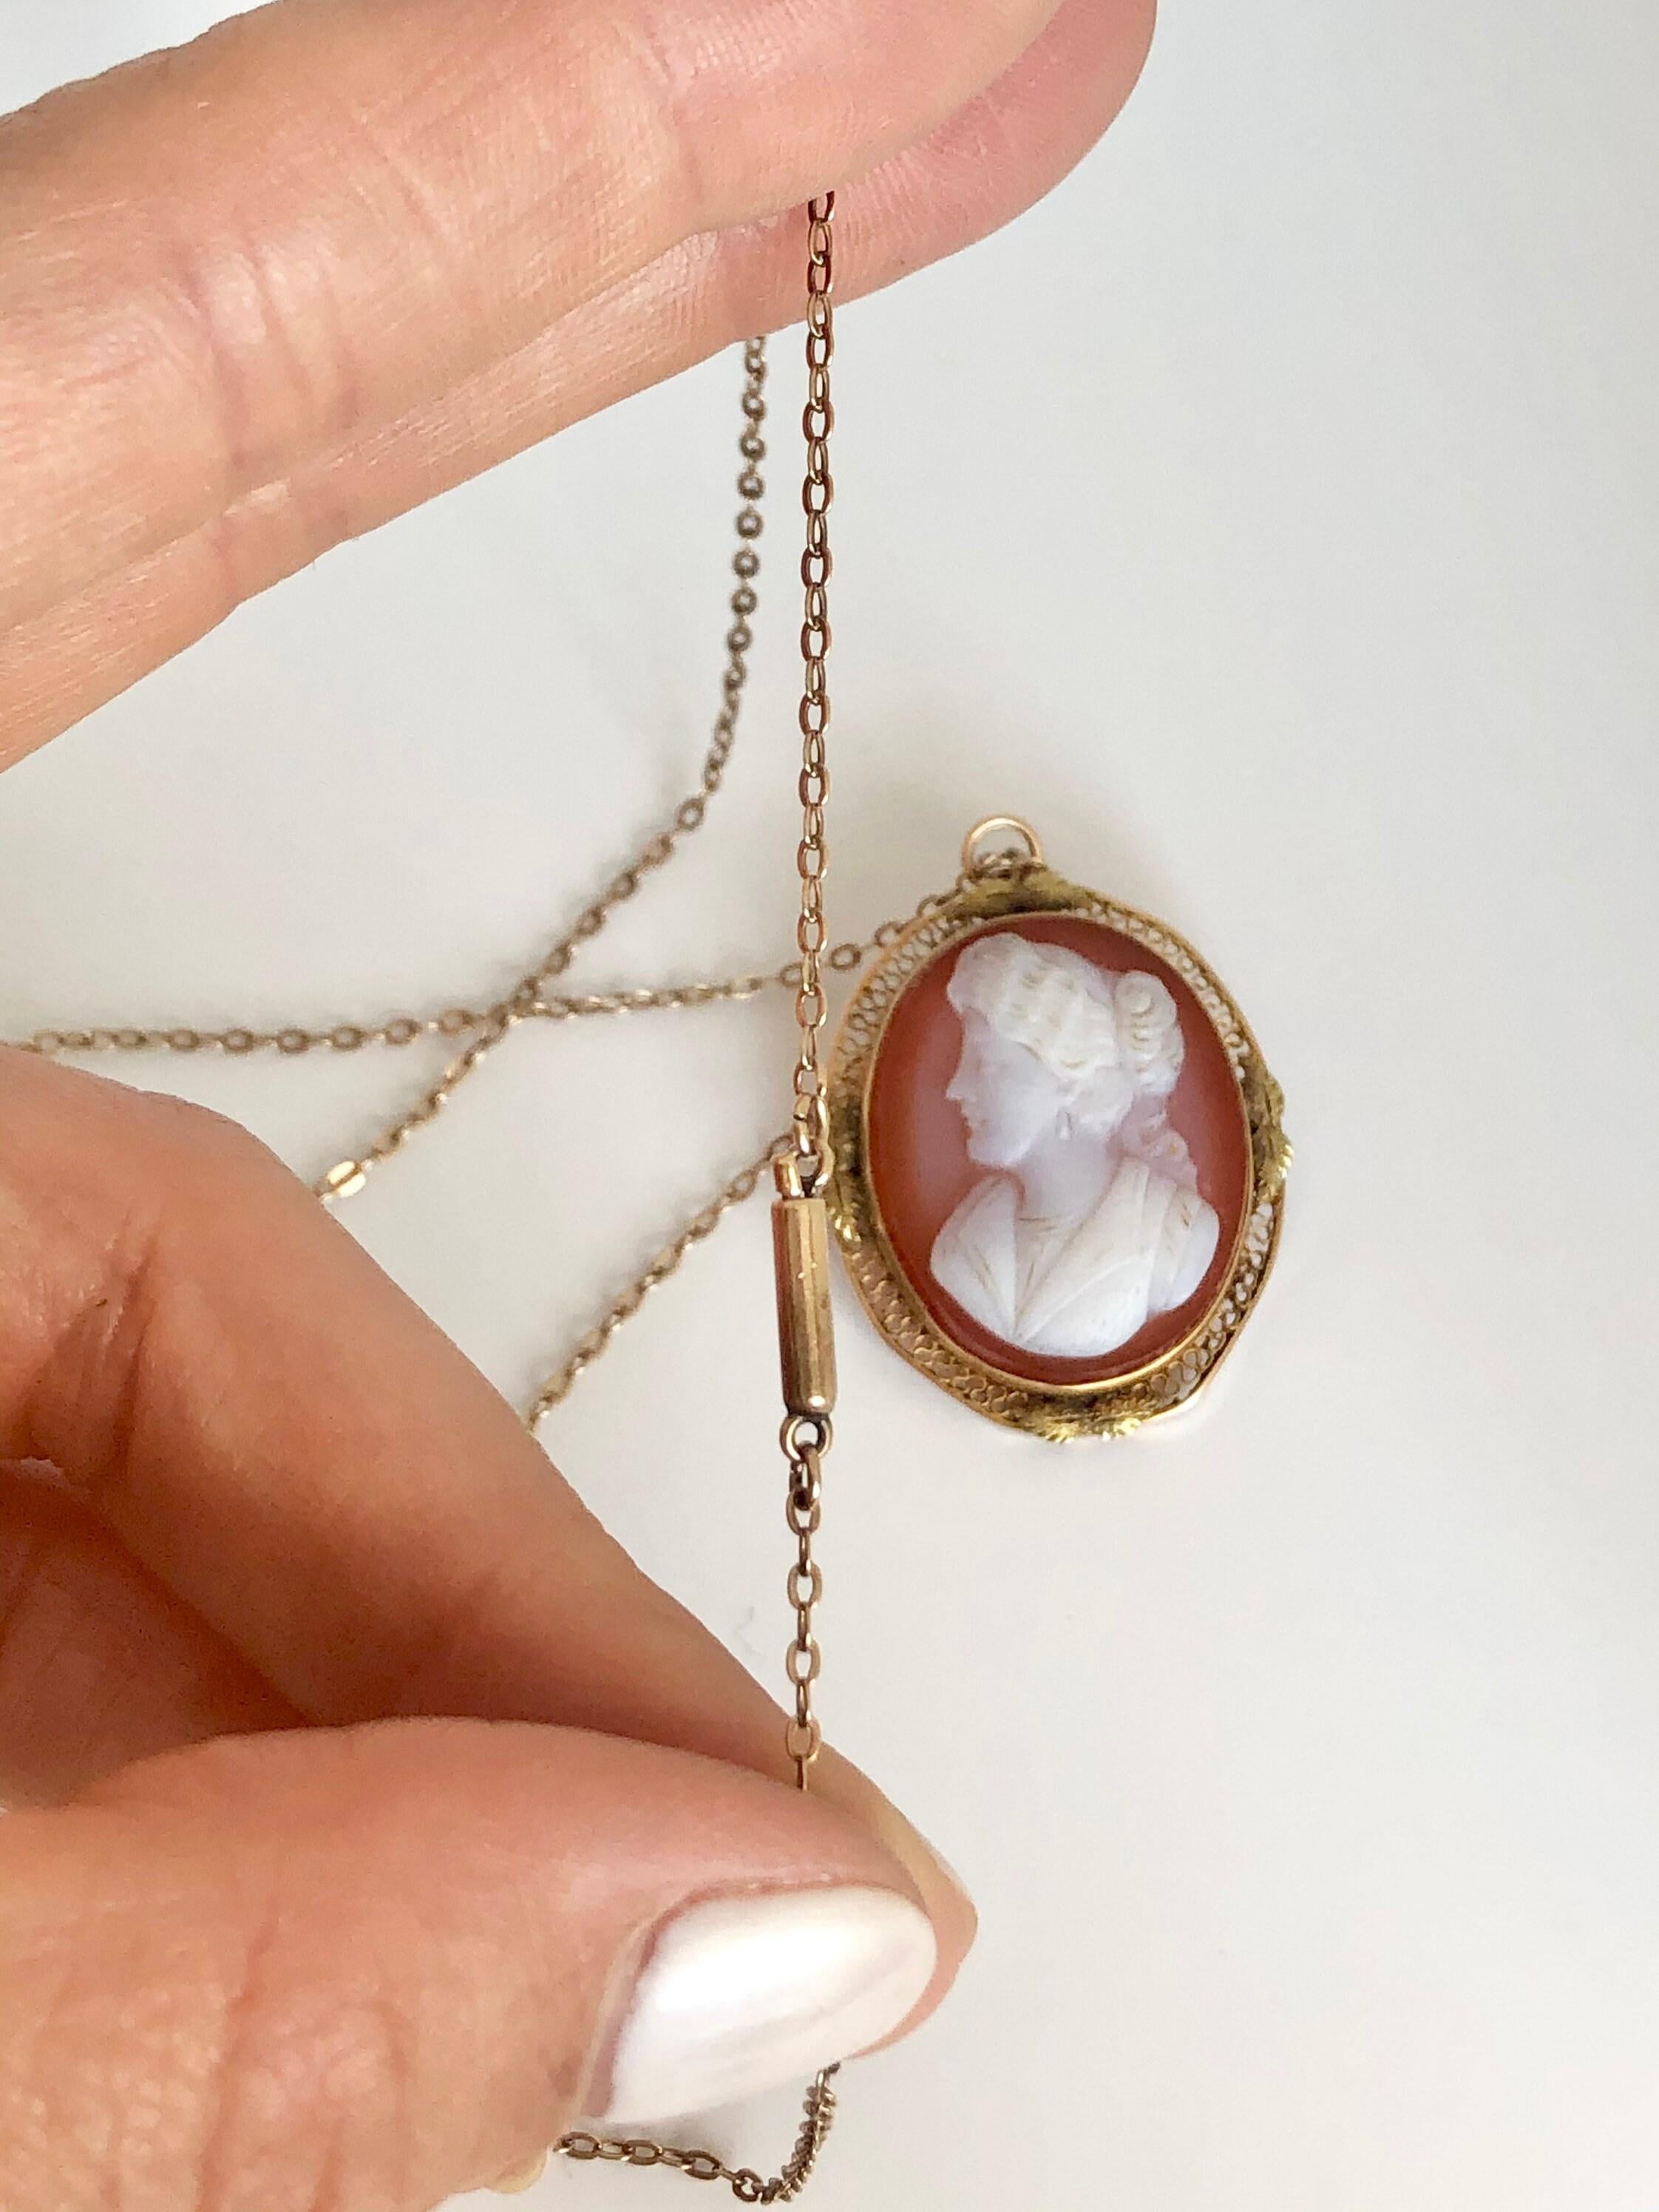 Victorian Cameo Necklace 

Beautiful Hardstone Cameo 
Filigree detailing, two colour gold. Rose gold & Yellow gold leaves. 

Lovely Barrel Clasp 

Chain marked 10ct Gold 

Cameo is set in 10ct Gold

Relief is in perfect condition.

Circa 1890